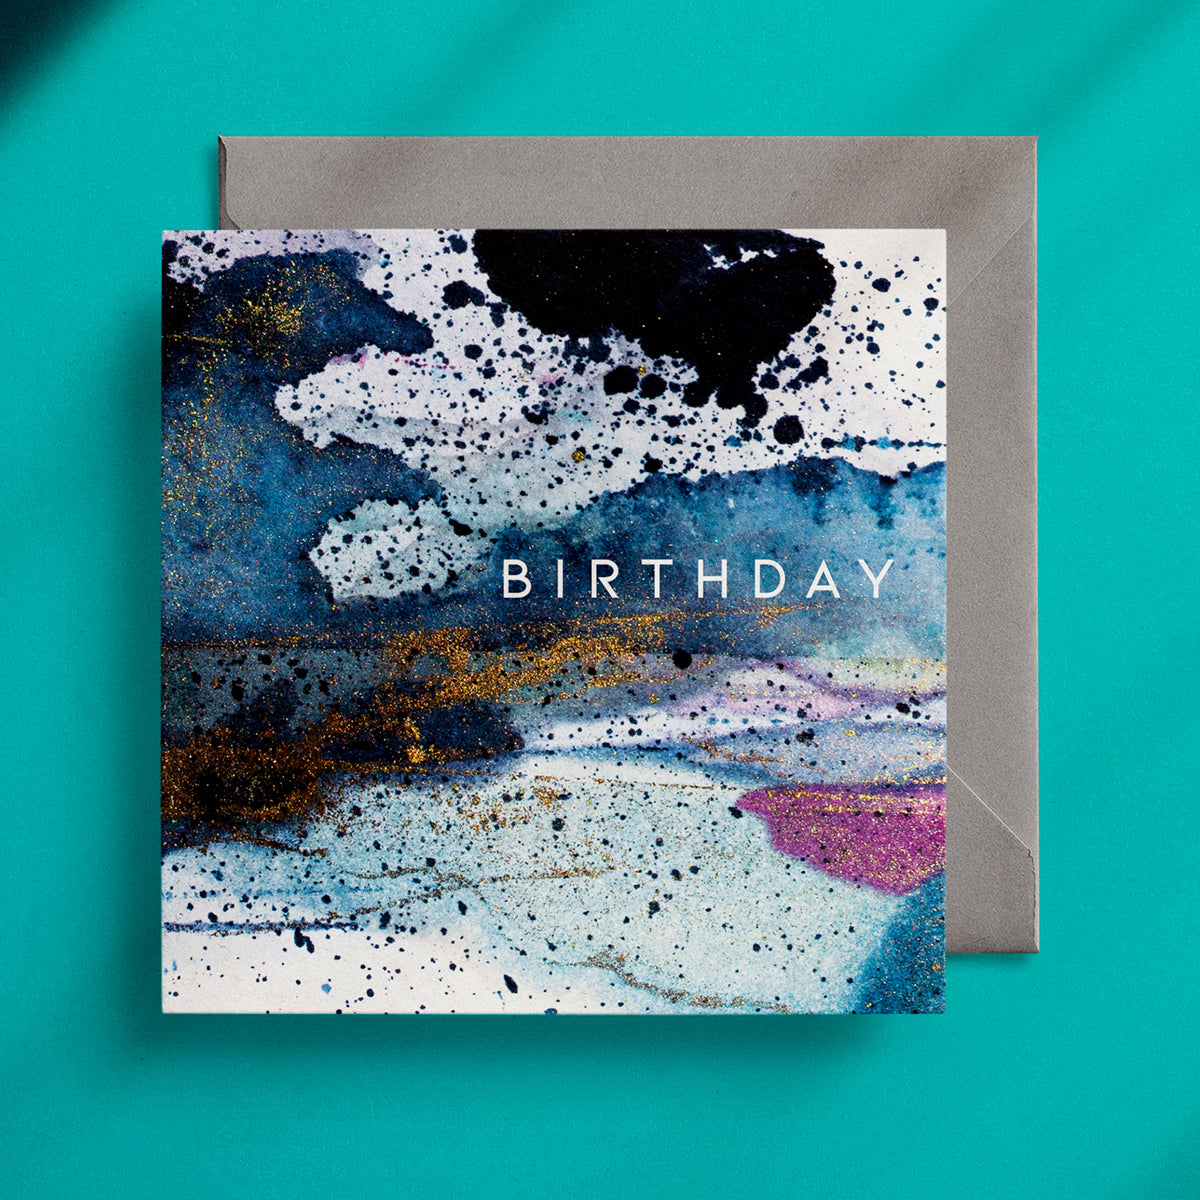 Dark blue, ink spattered, square birthday card with a grey envelope on a green background